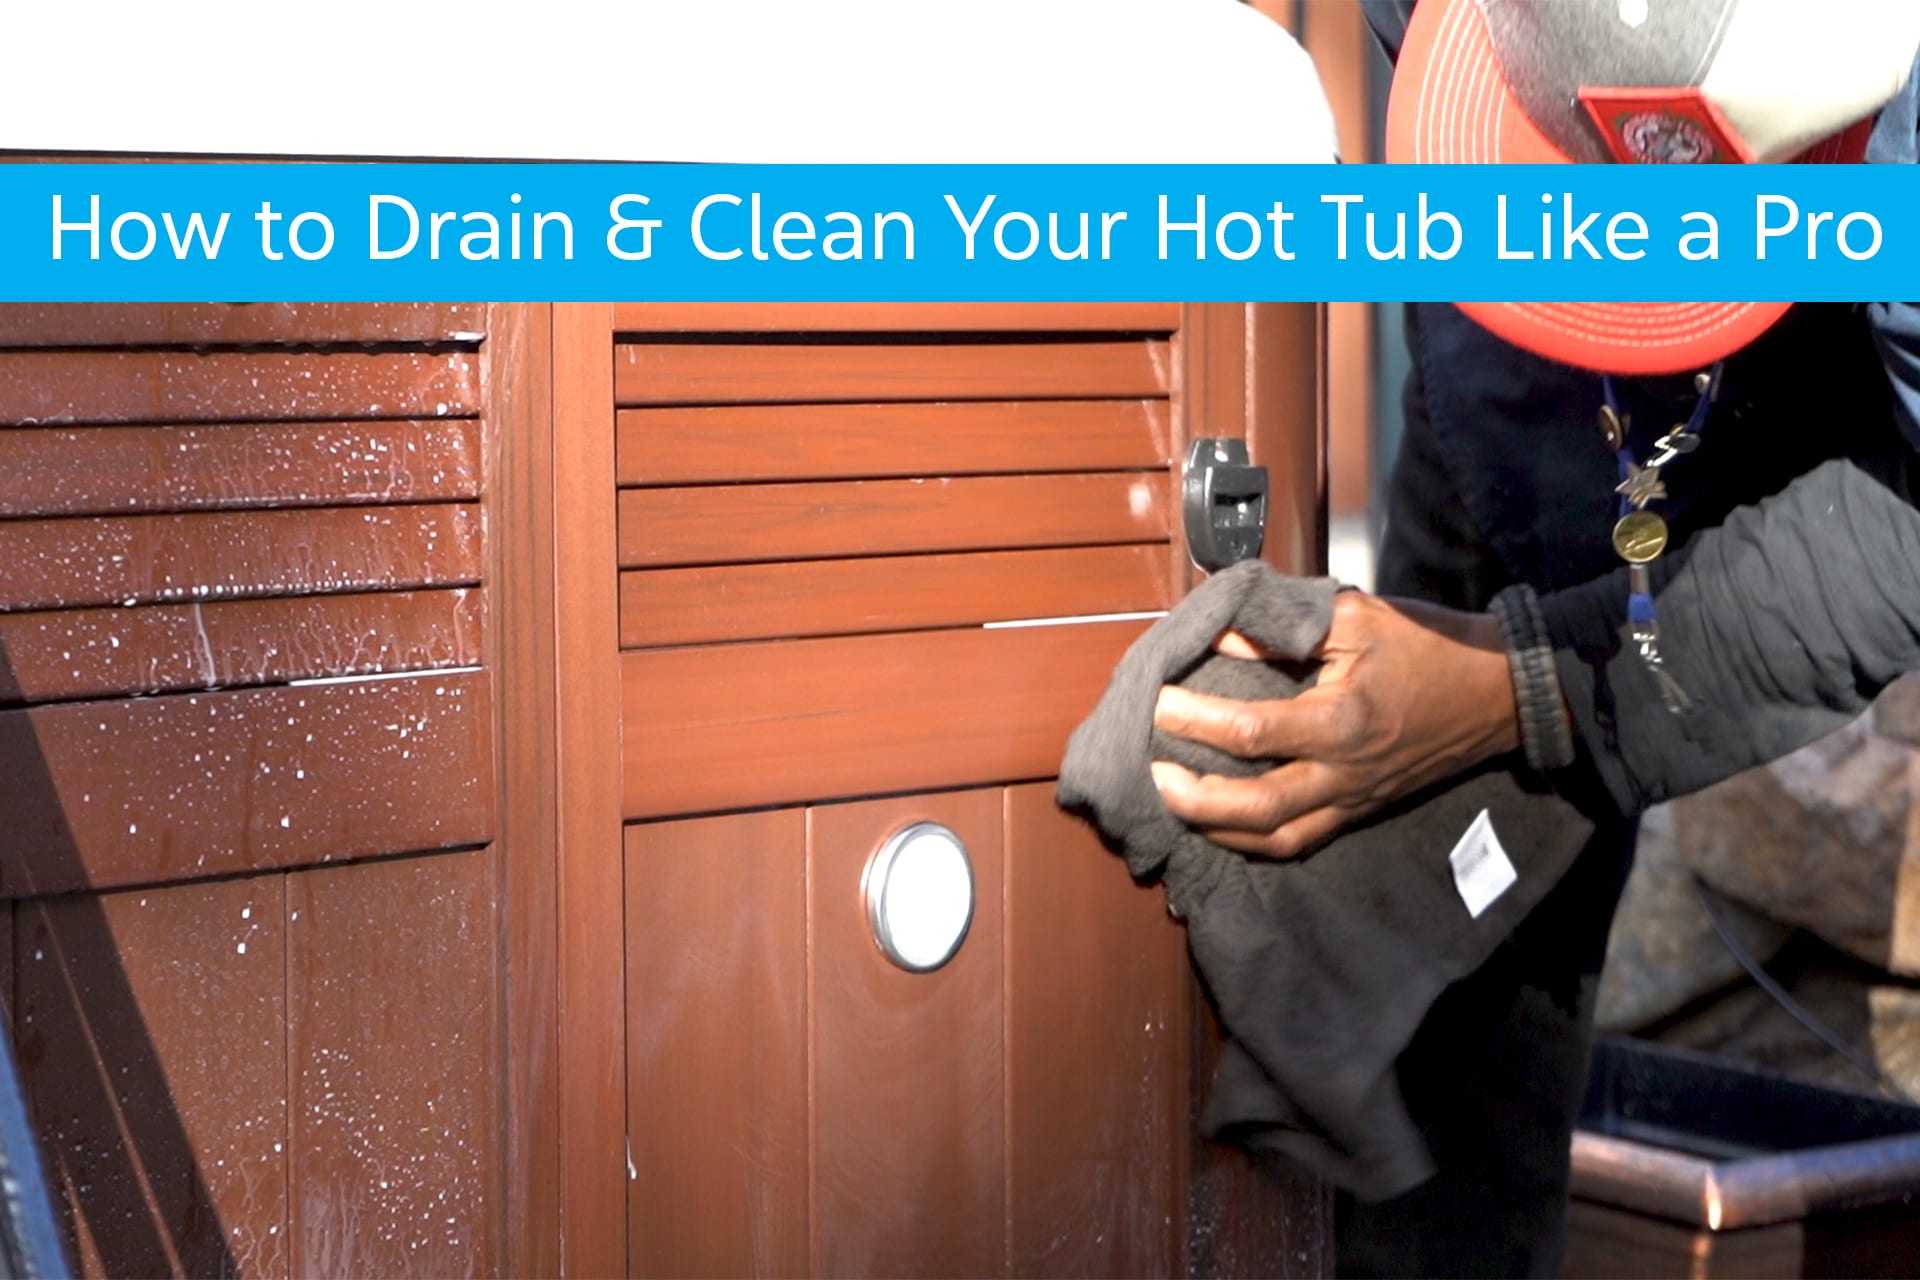 How to Drain a Hot Tub Like a Pro